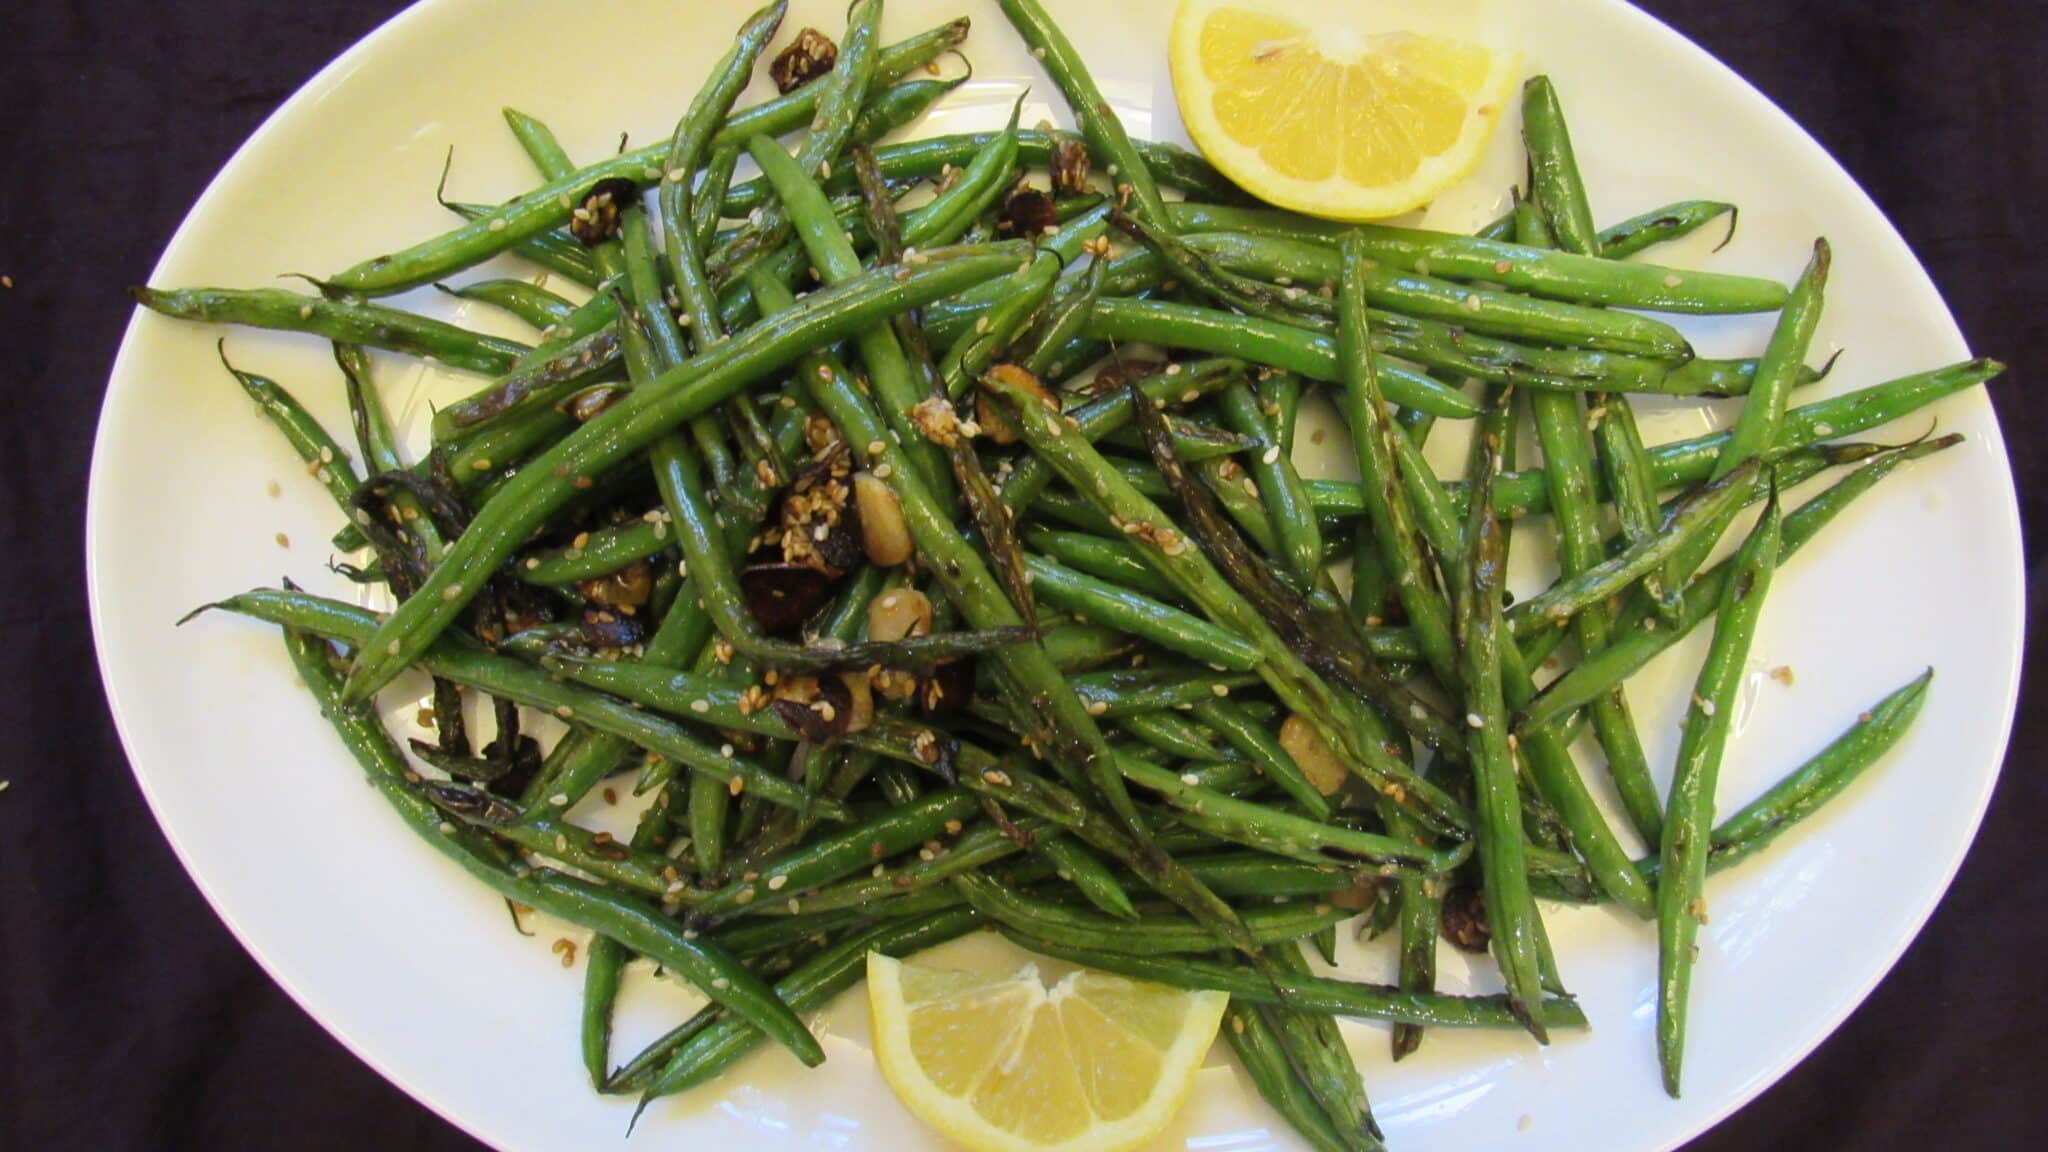 Oven-roasted fresh green beans are served with fresh lemon cuts on a white plate-Top view picture shot.